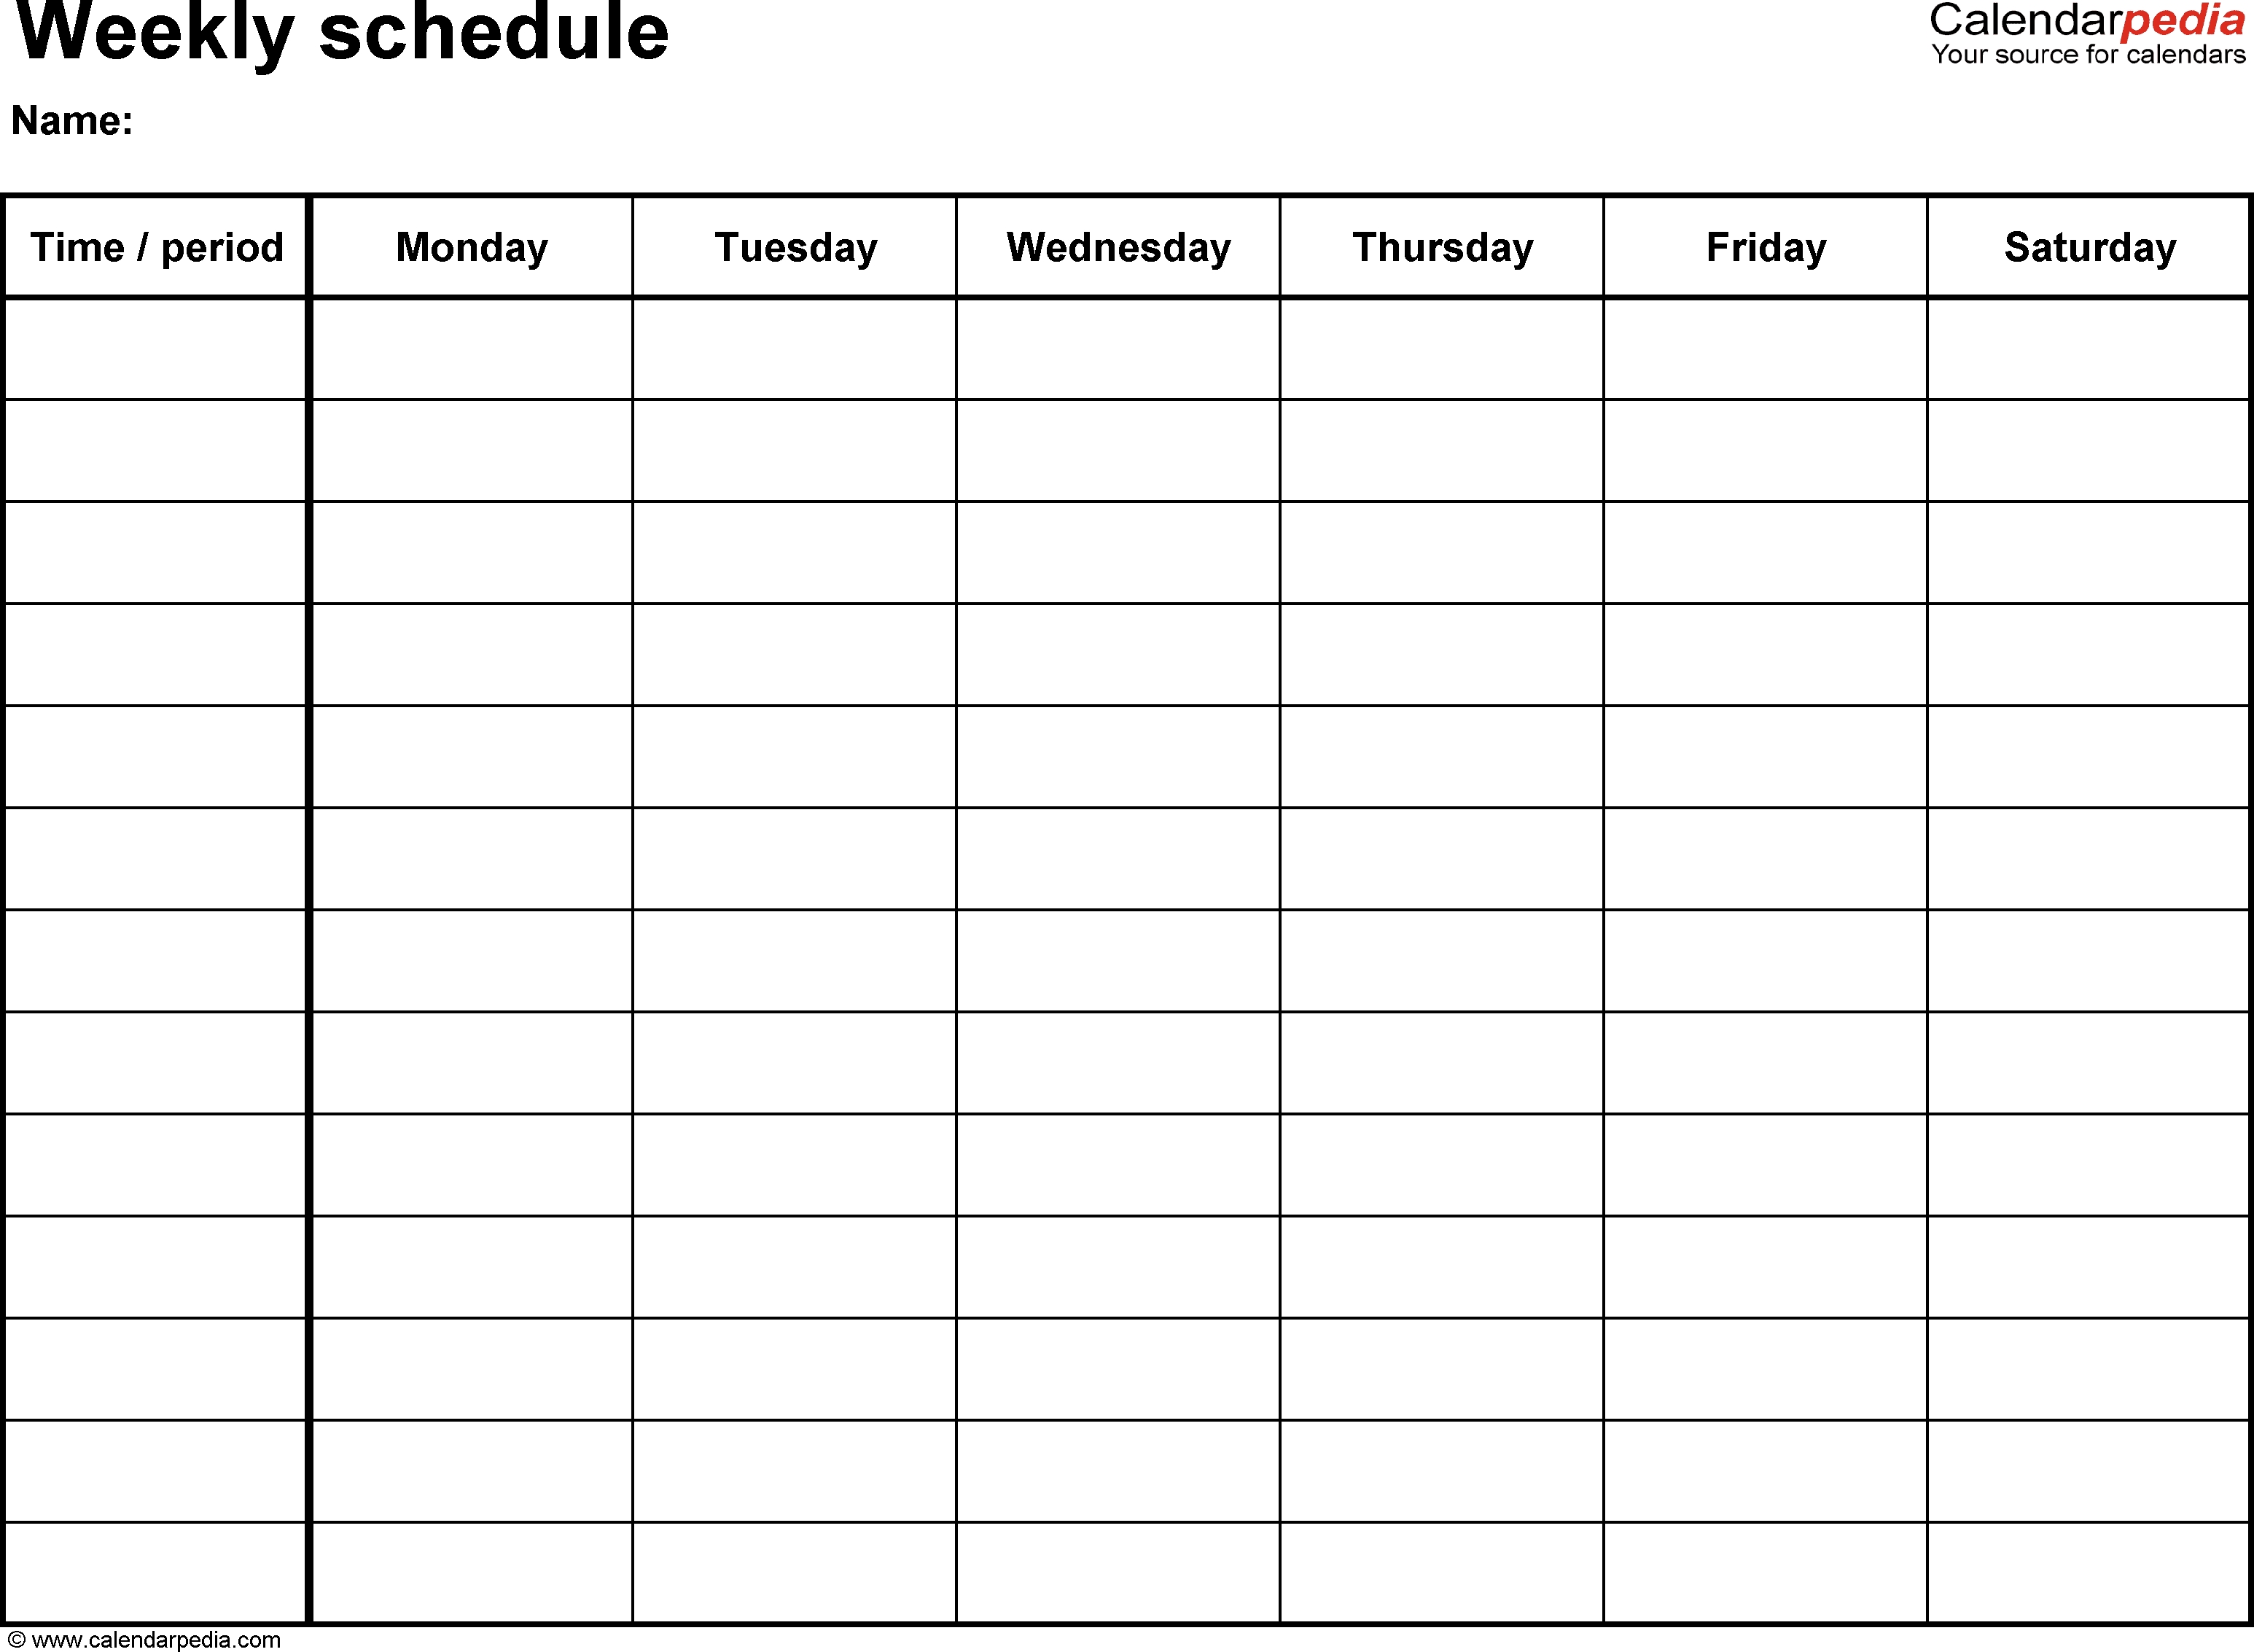 Free Weekly Schedule Templates For Word - 18 Templates 7 Day Monthly Calendar